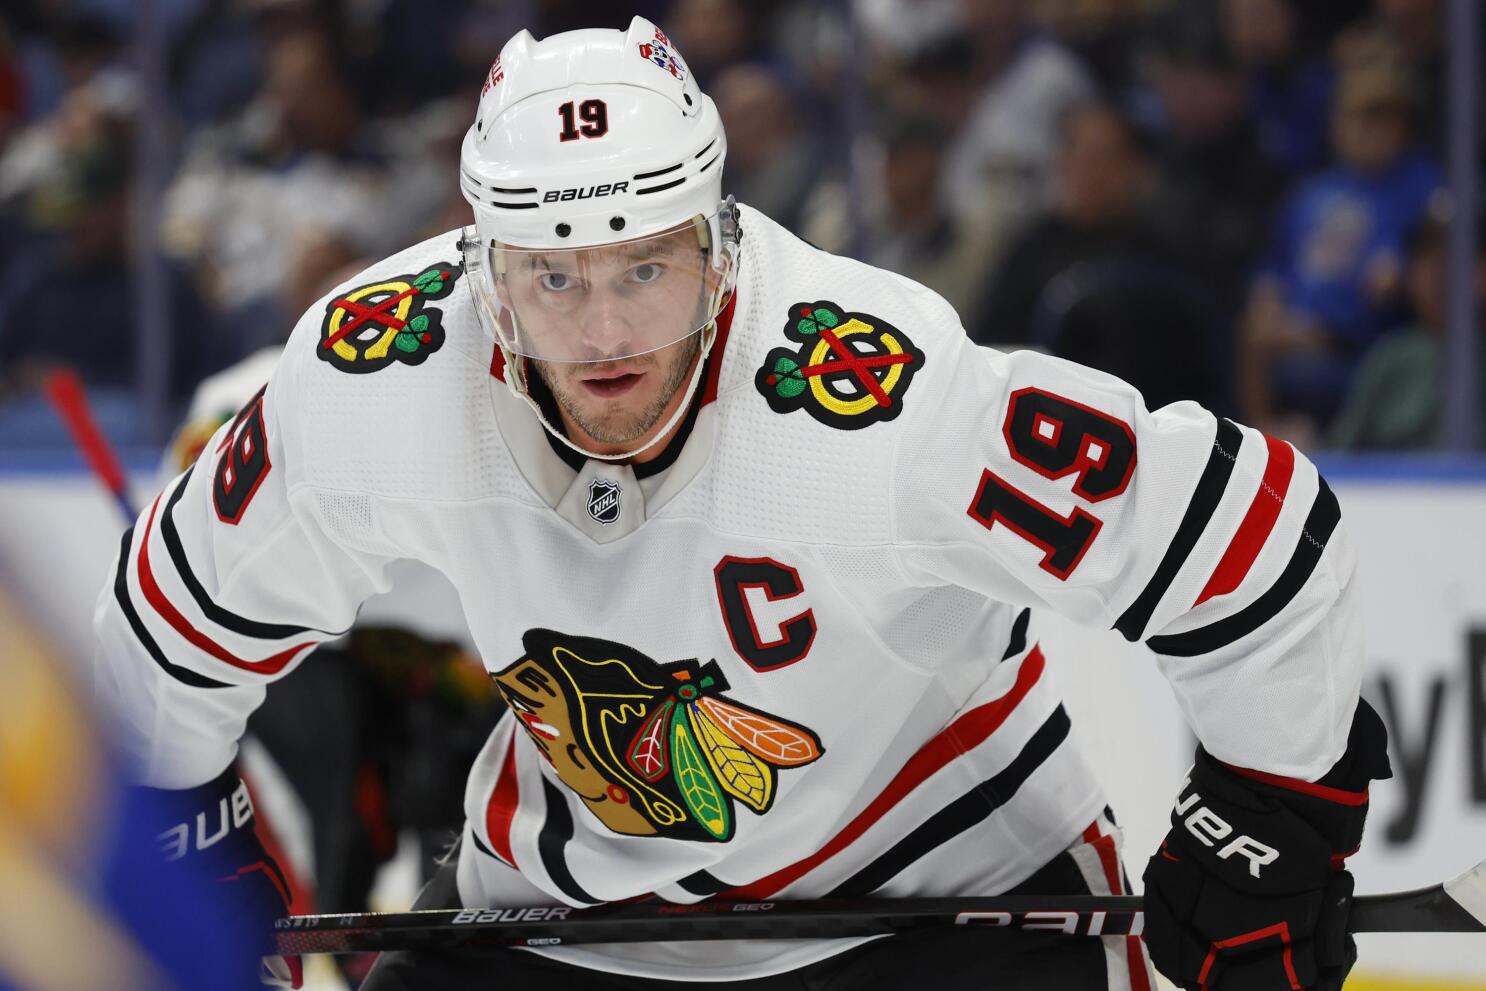 End of the road for Toews? Blackhawks captain 'seriously